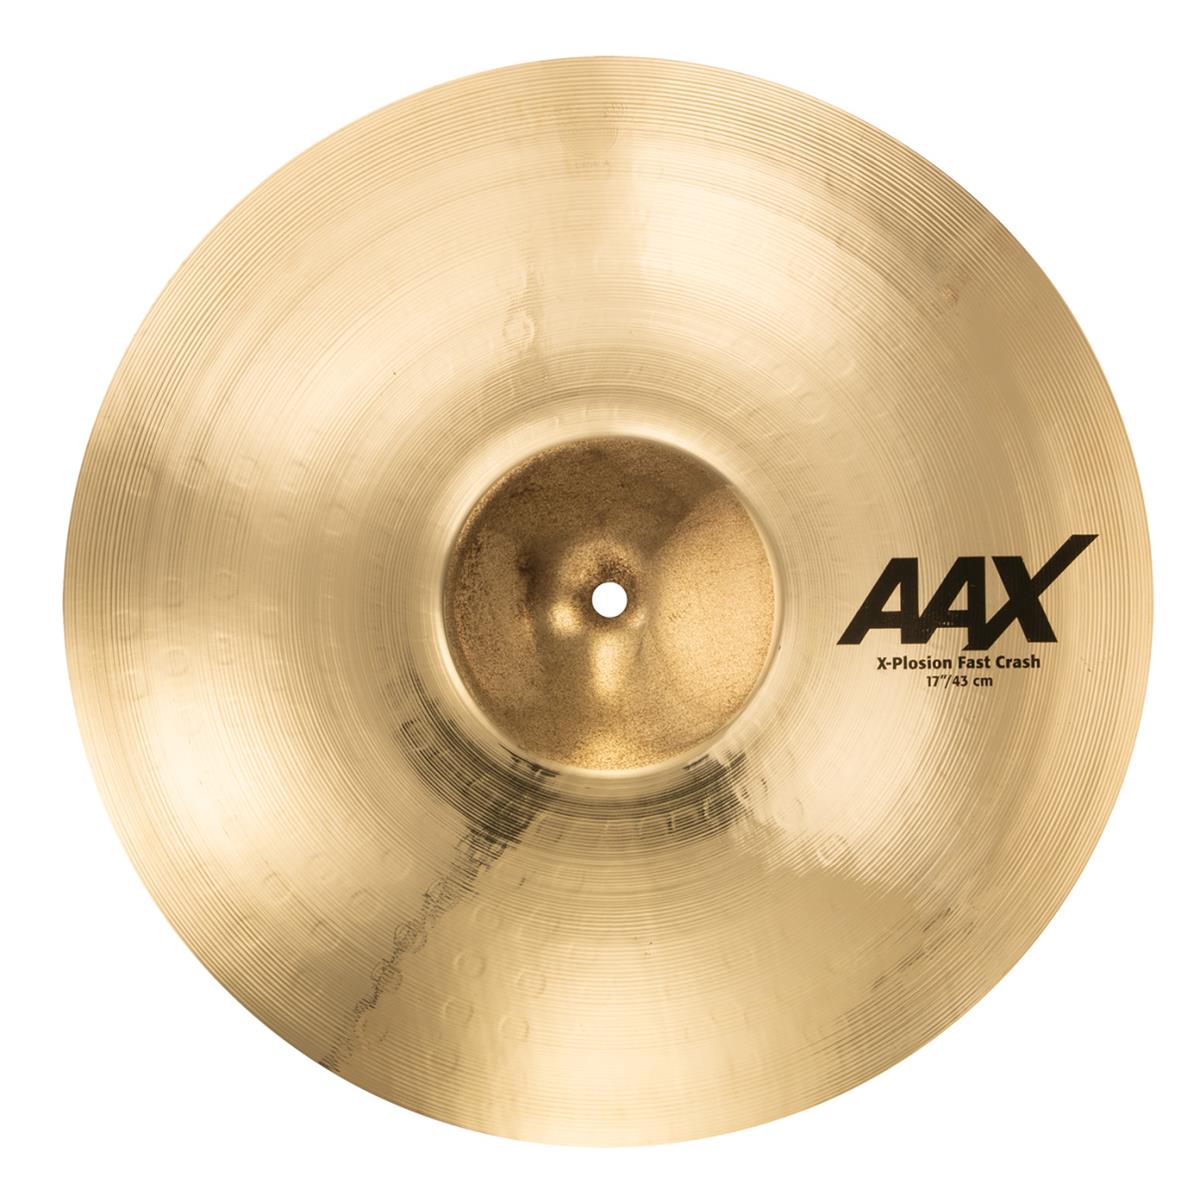 Sabian 17" AAX X-Plosion Fast Crash Cymbal, Extra-Thin, Brilliant Finish Super-fast, with full, explosive response, the SABIAN 17" AAX X-Plosion Fast Crash redefines the power potential for Tuner cymbals with even faster, punchier accents at all volume levels. The SABIAN AAX series delivers consistently bright, crisp, clear and cutting responses - AAX is the ultimate Modern Bright sound!